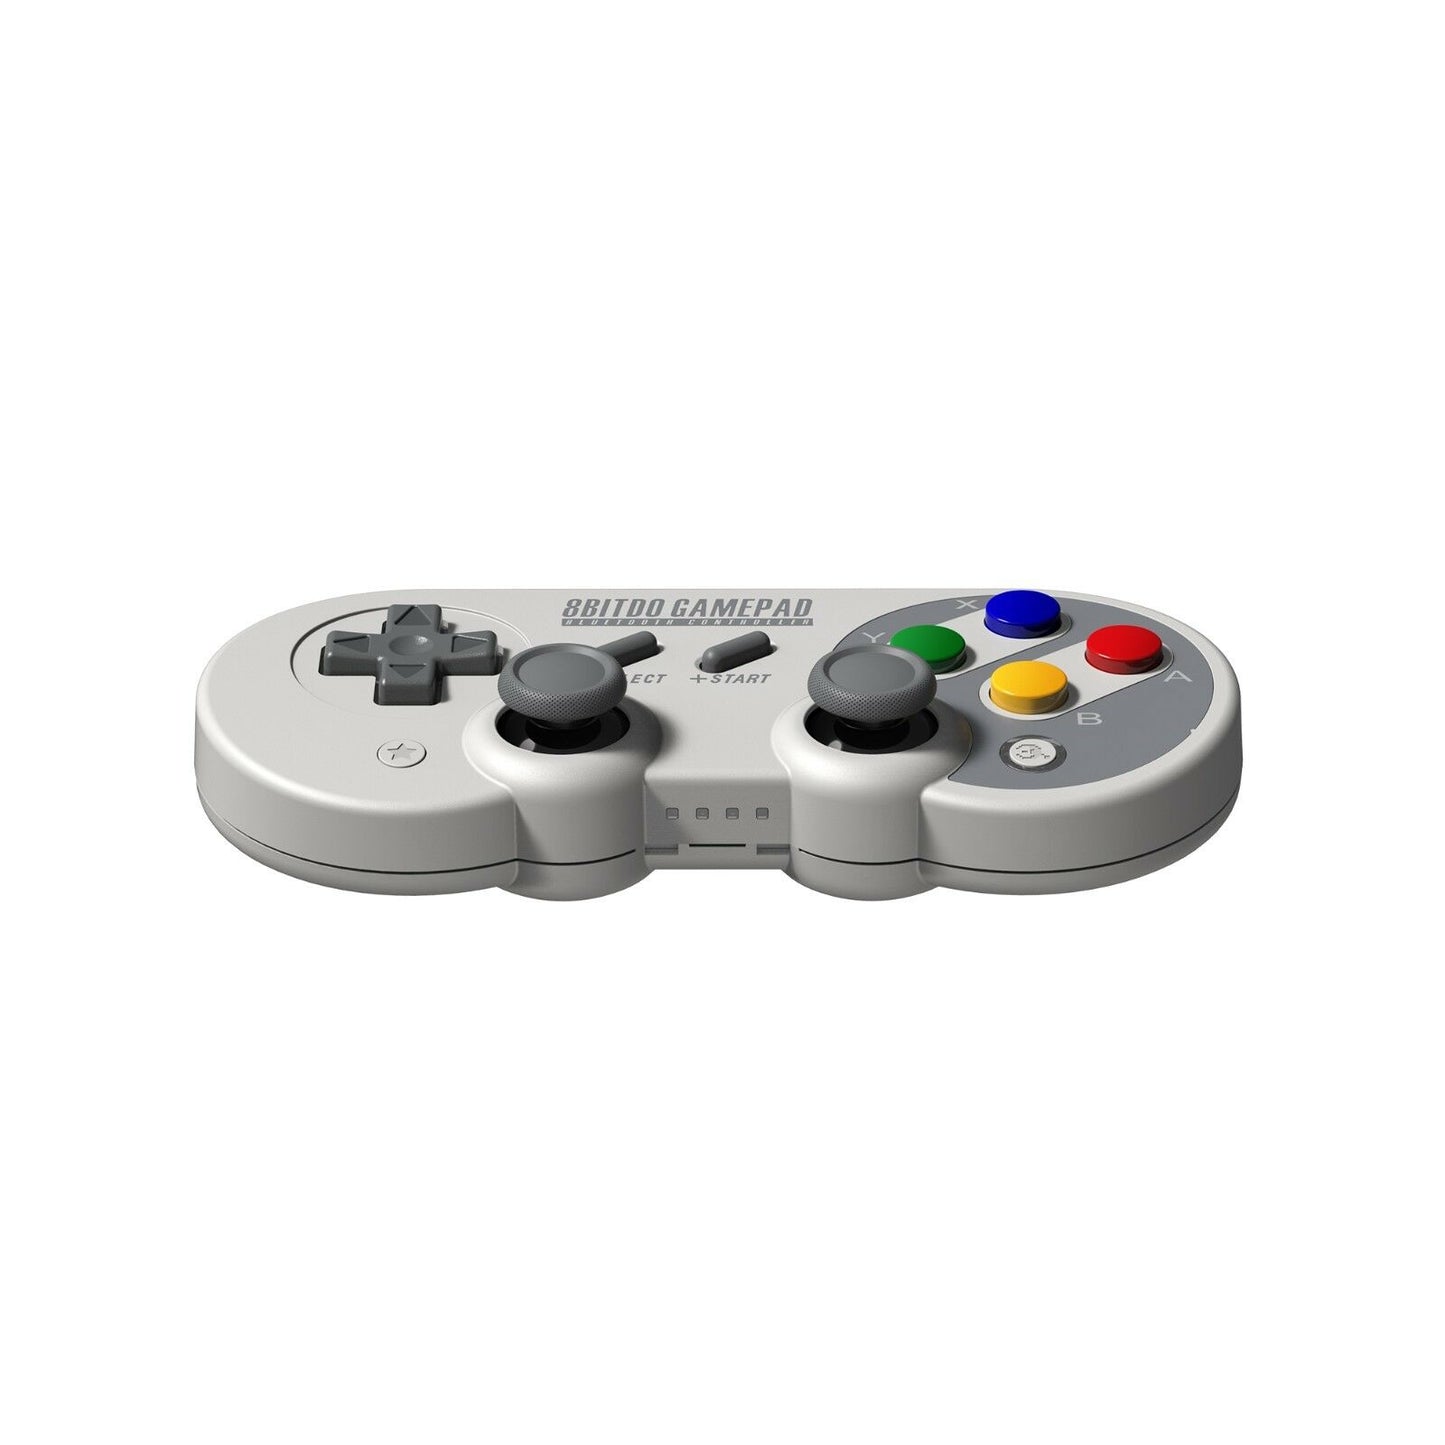 NEW!8Bitdo SF30 Pro Gamepad Controller for Nintendo Switch Windows macOS Android